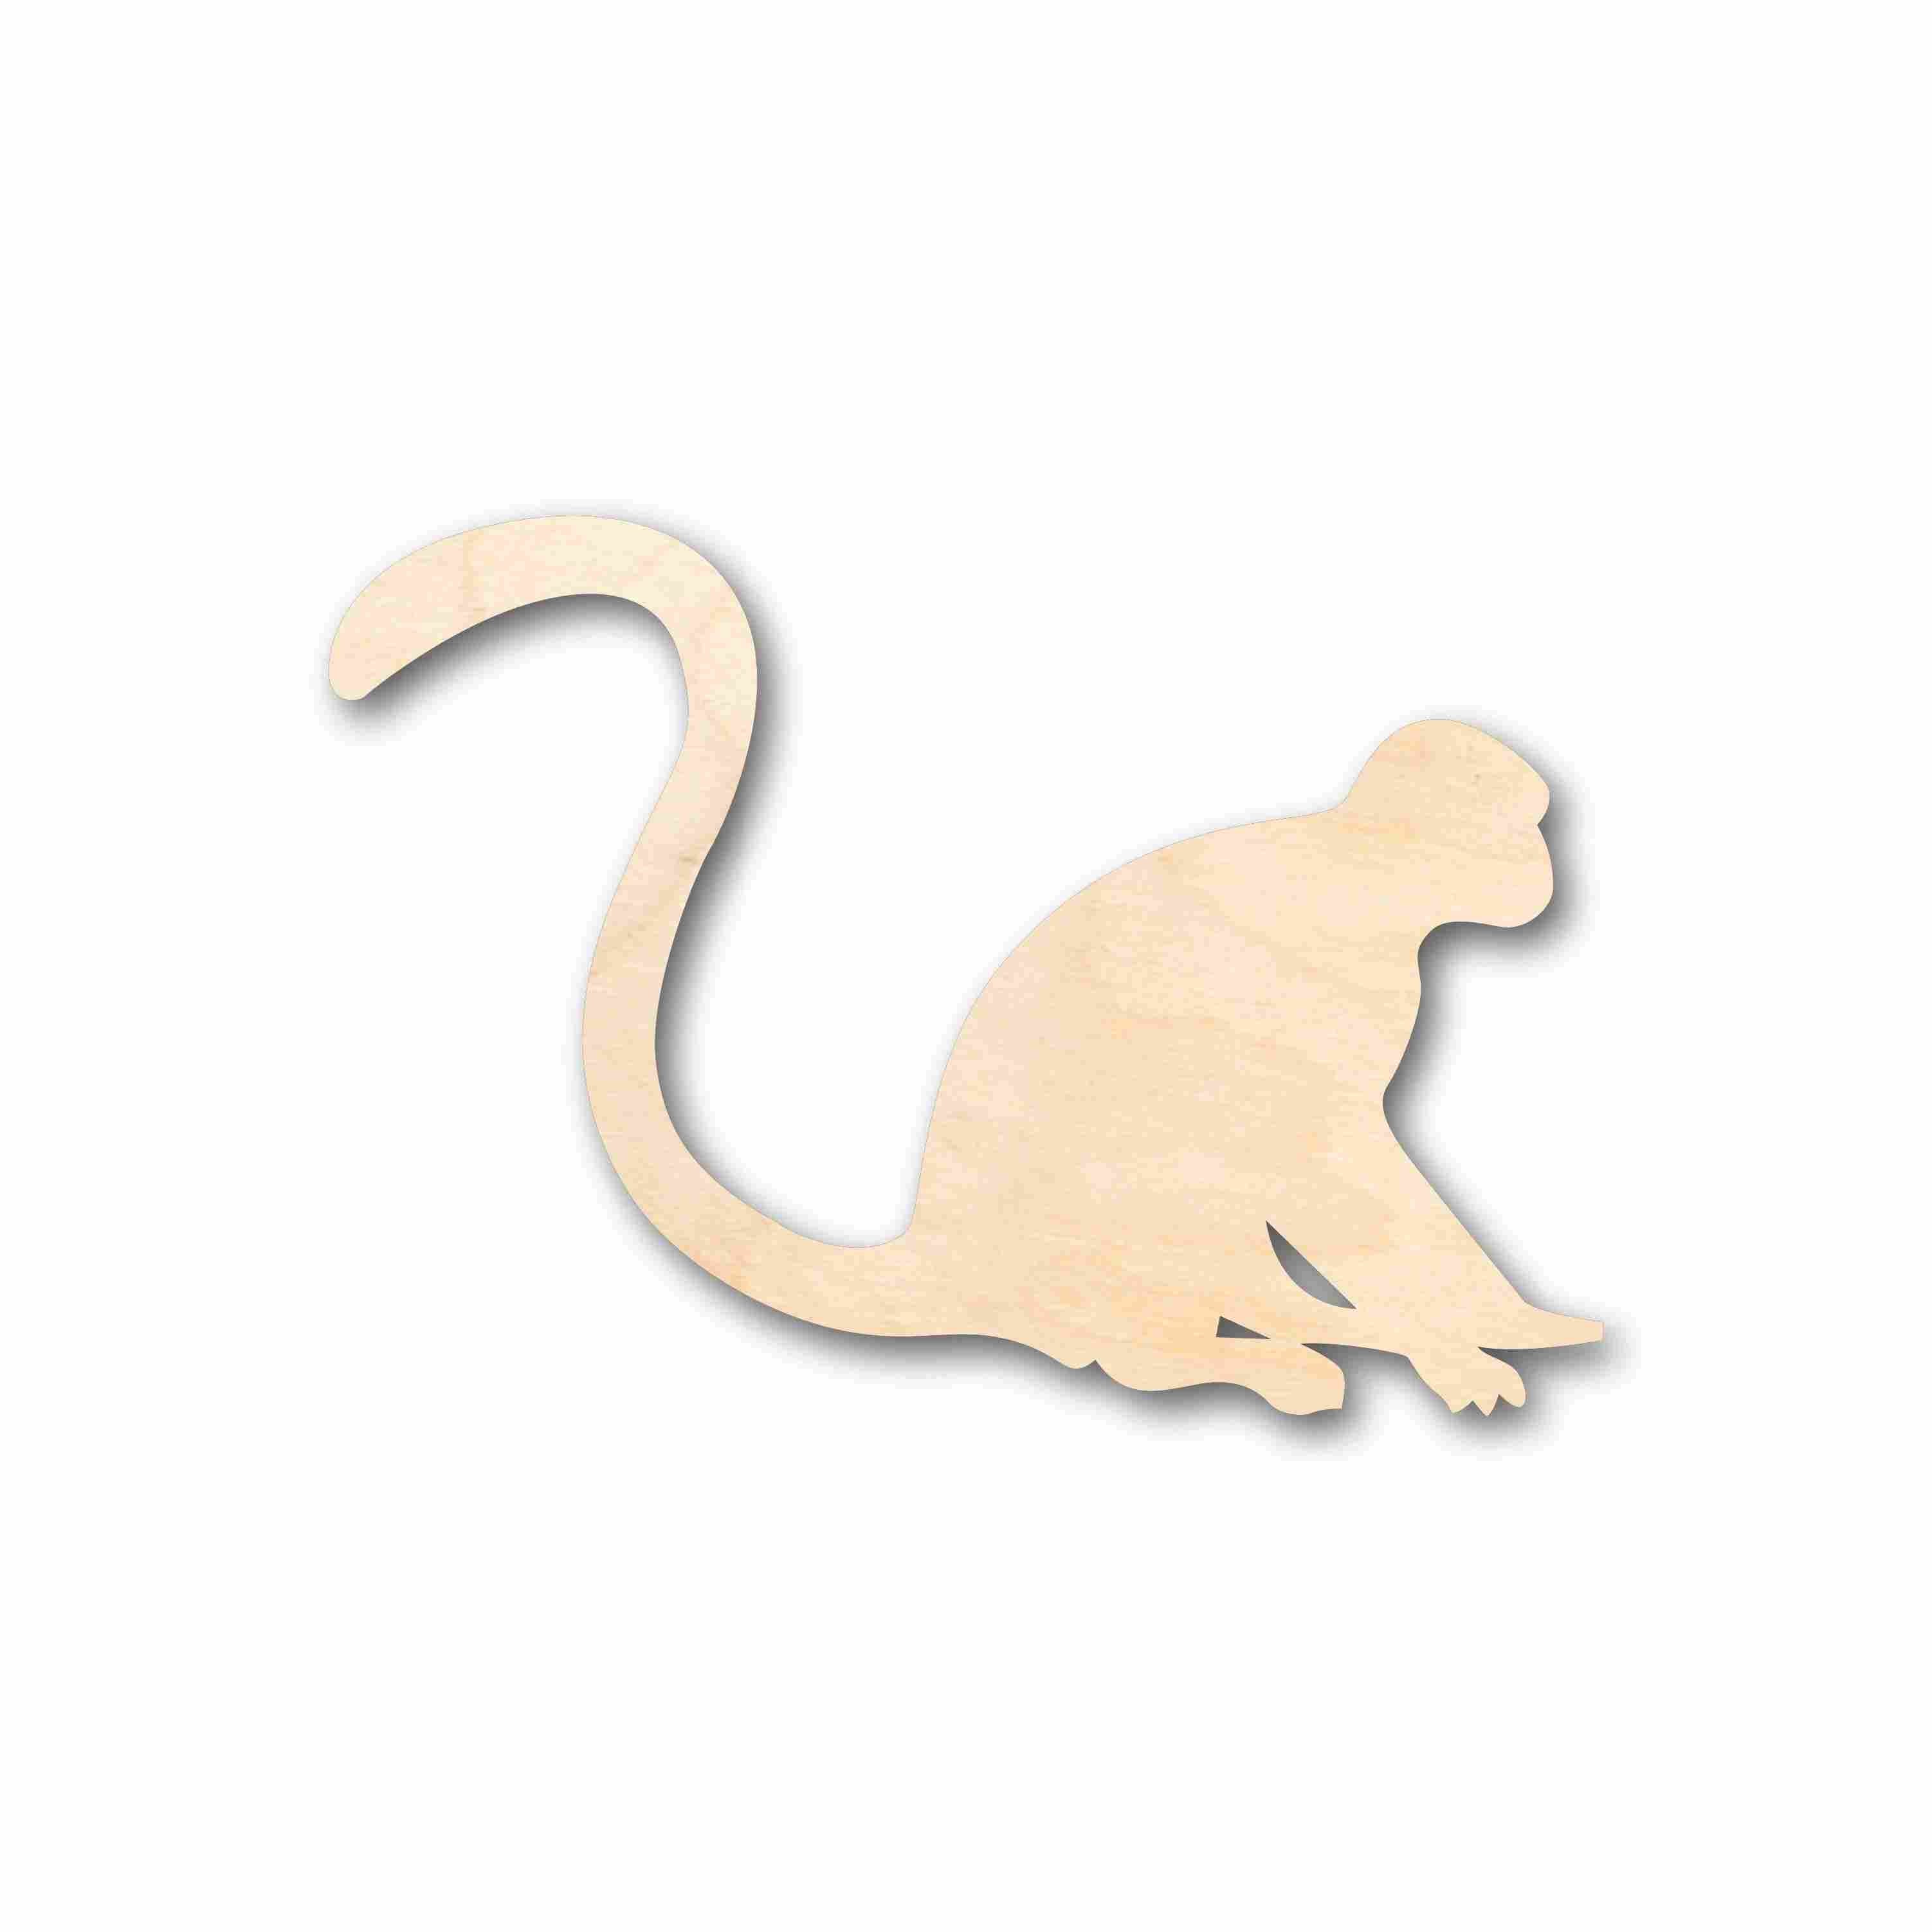 Unfinished Wood Monkey Silhouette - Craft- up to 24